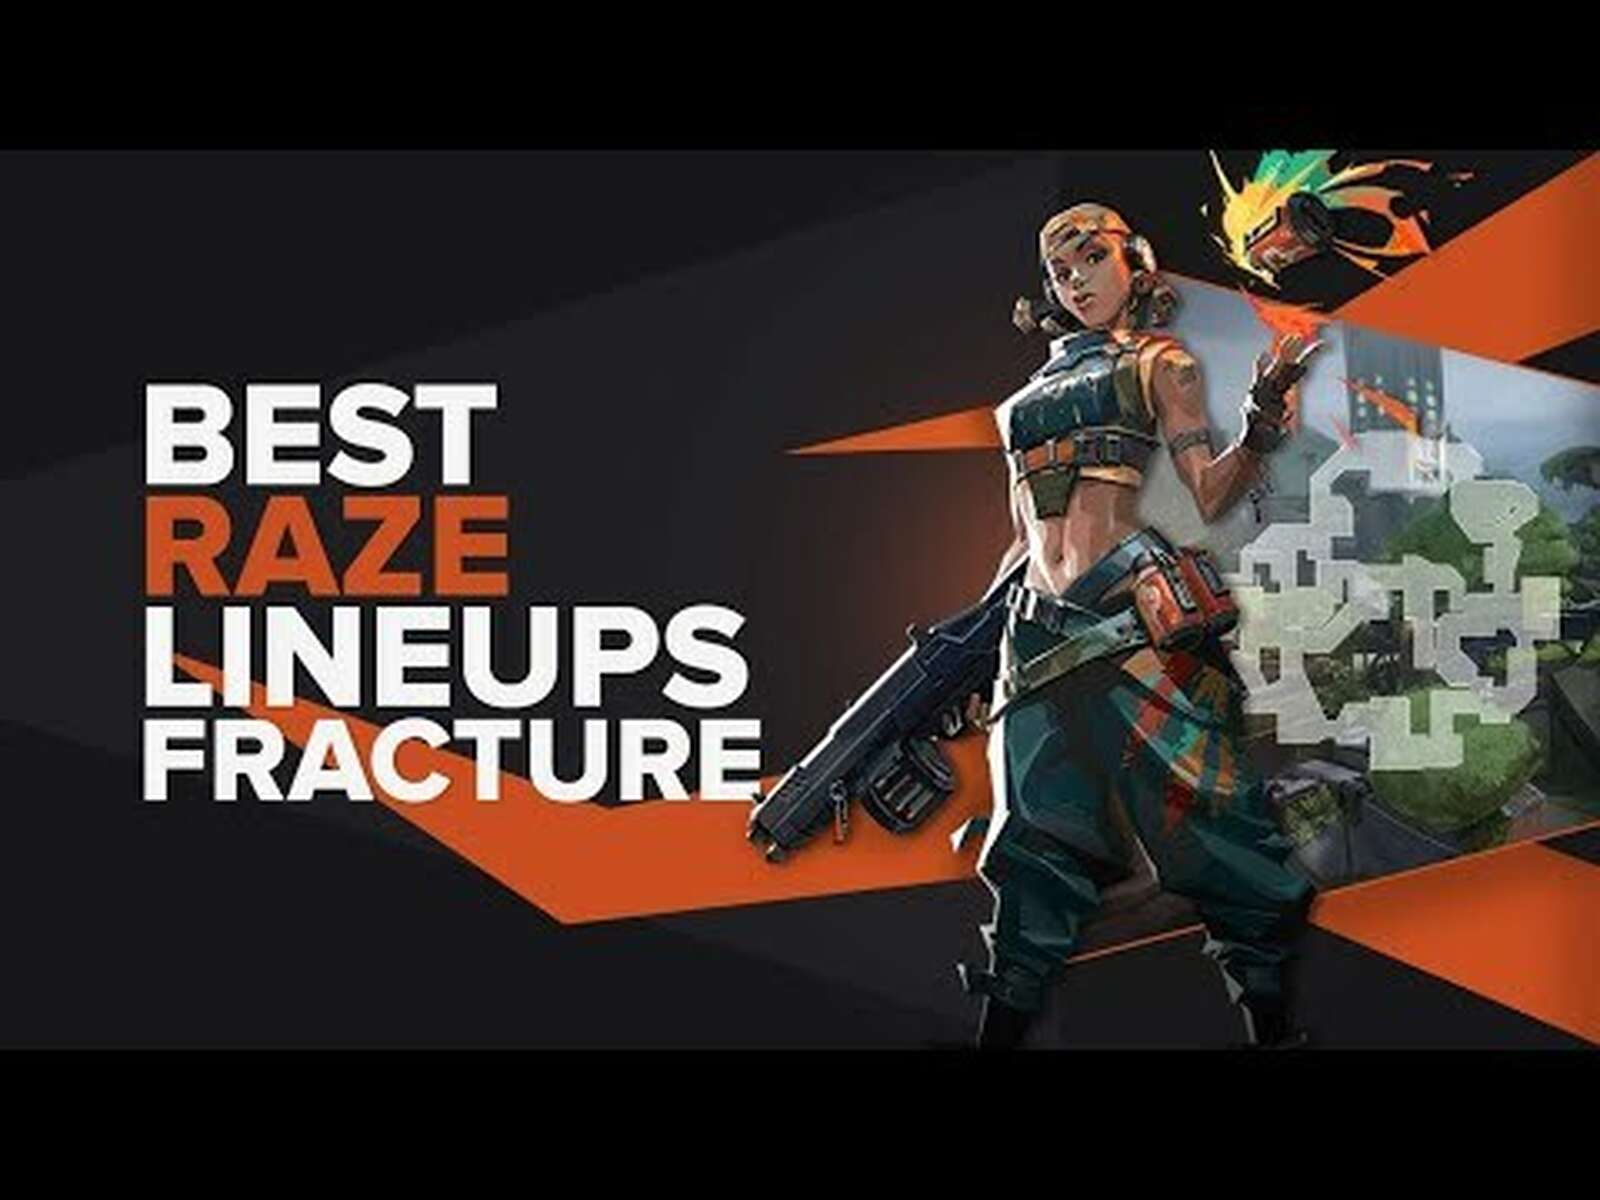 The Best Raze Lineups on Fracture